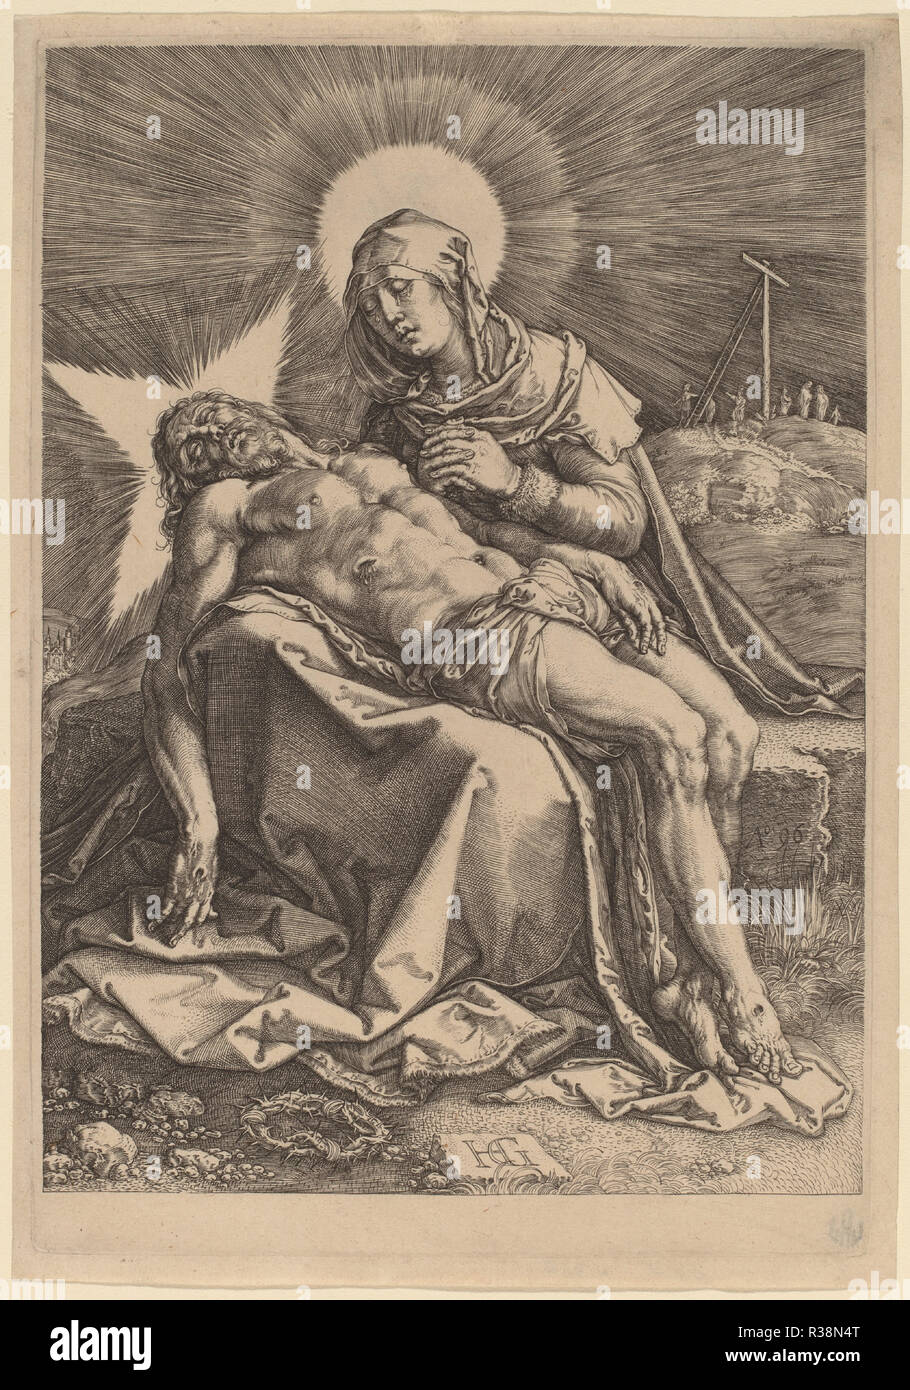 Pietà (The Sorrowing Virgin with the Dead Christ in Her Lap). Dated: 1596. Medium: engraving. Museum: National Gallery of Art, Washington DC. Author: Hendrik Goltzius. Stock Photo